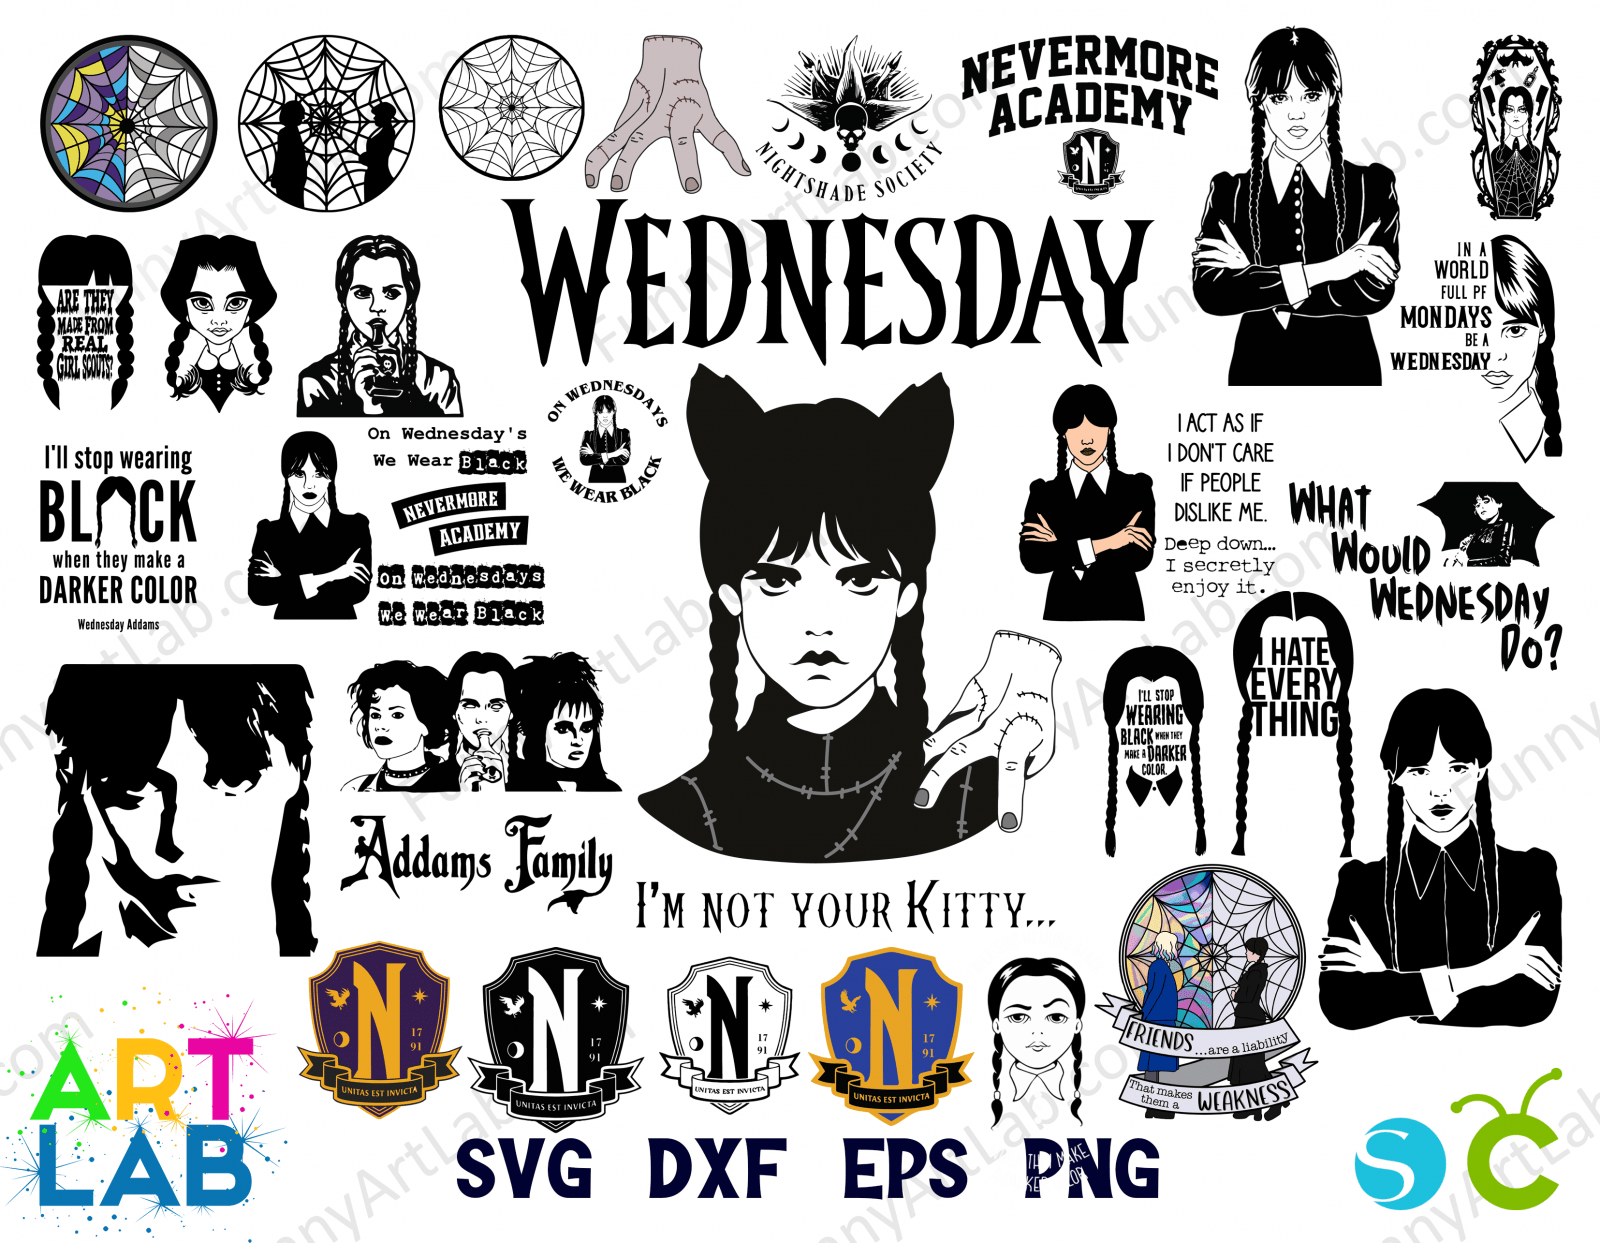 Wednesday Cliparts 58 PNG 24 Wallpapers Wednesday Addams. - Etsy - Clip ...